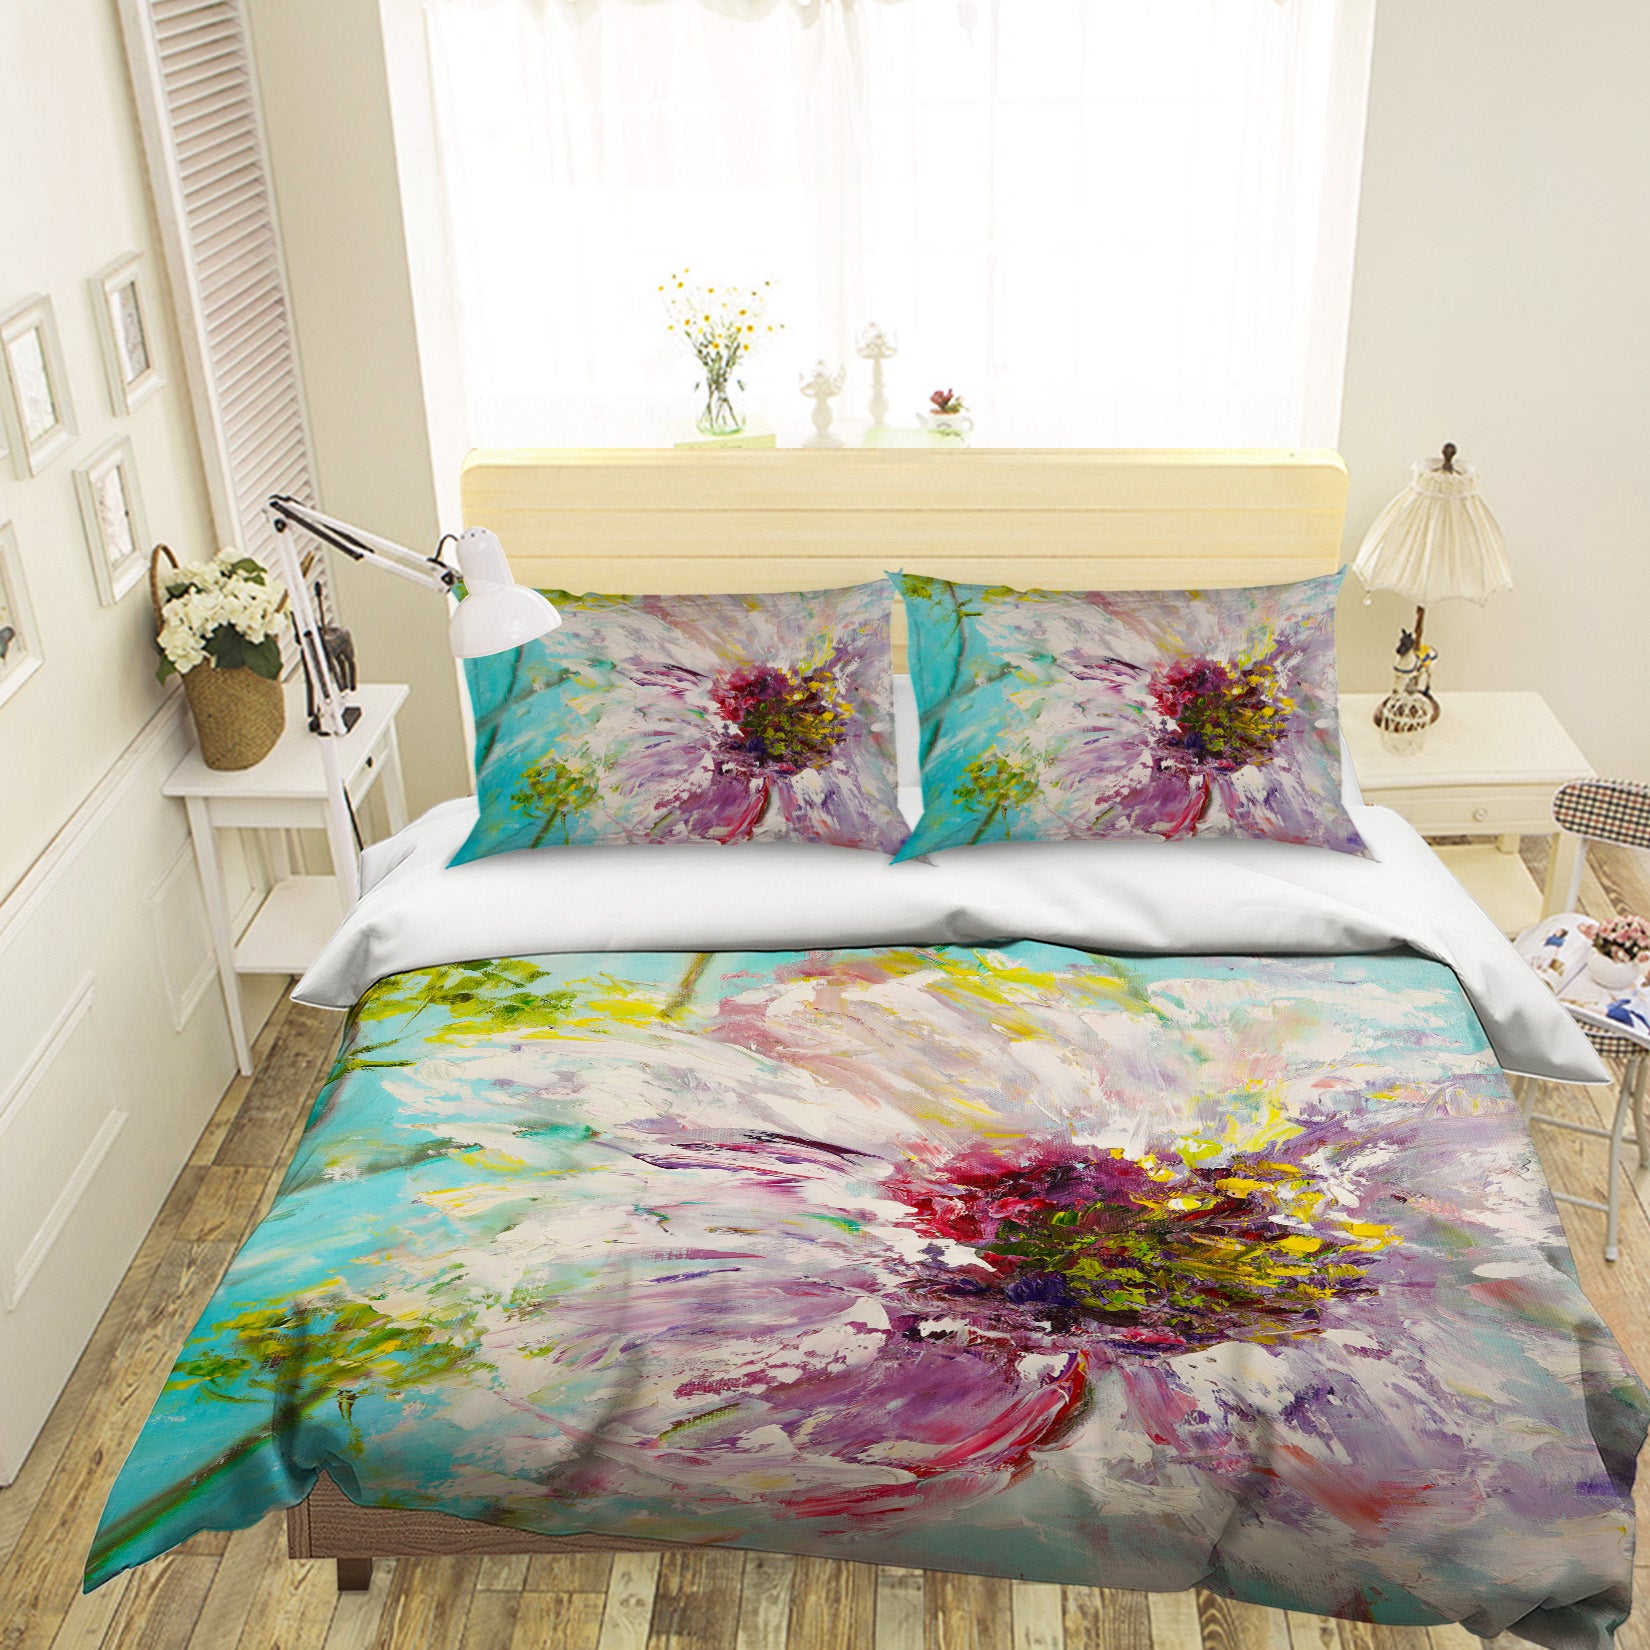 3D Pink Painted Flowers 542 Skromova Marina Bedding Bed Pillowcases Quilt